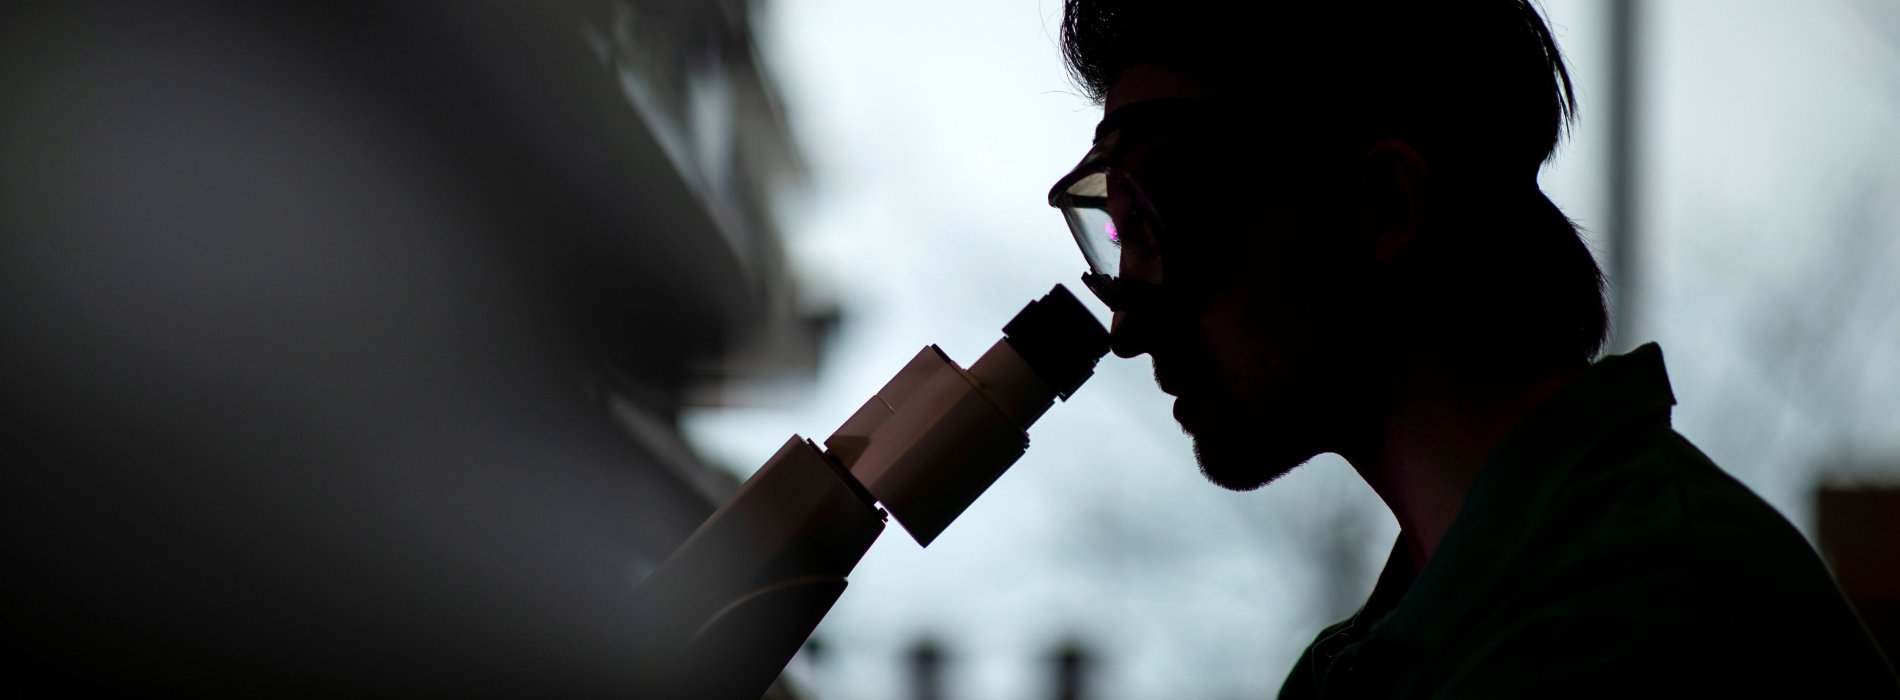 A researcher wearing eye protection leans in and looks into a microscope inside a laboratory.